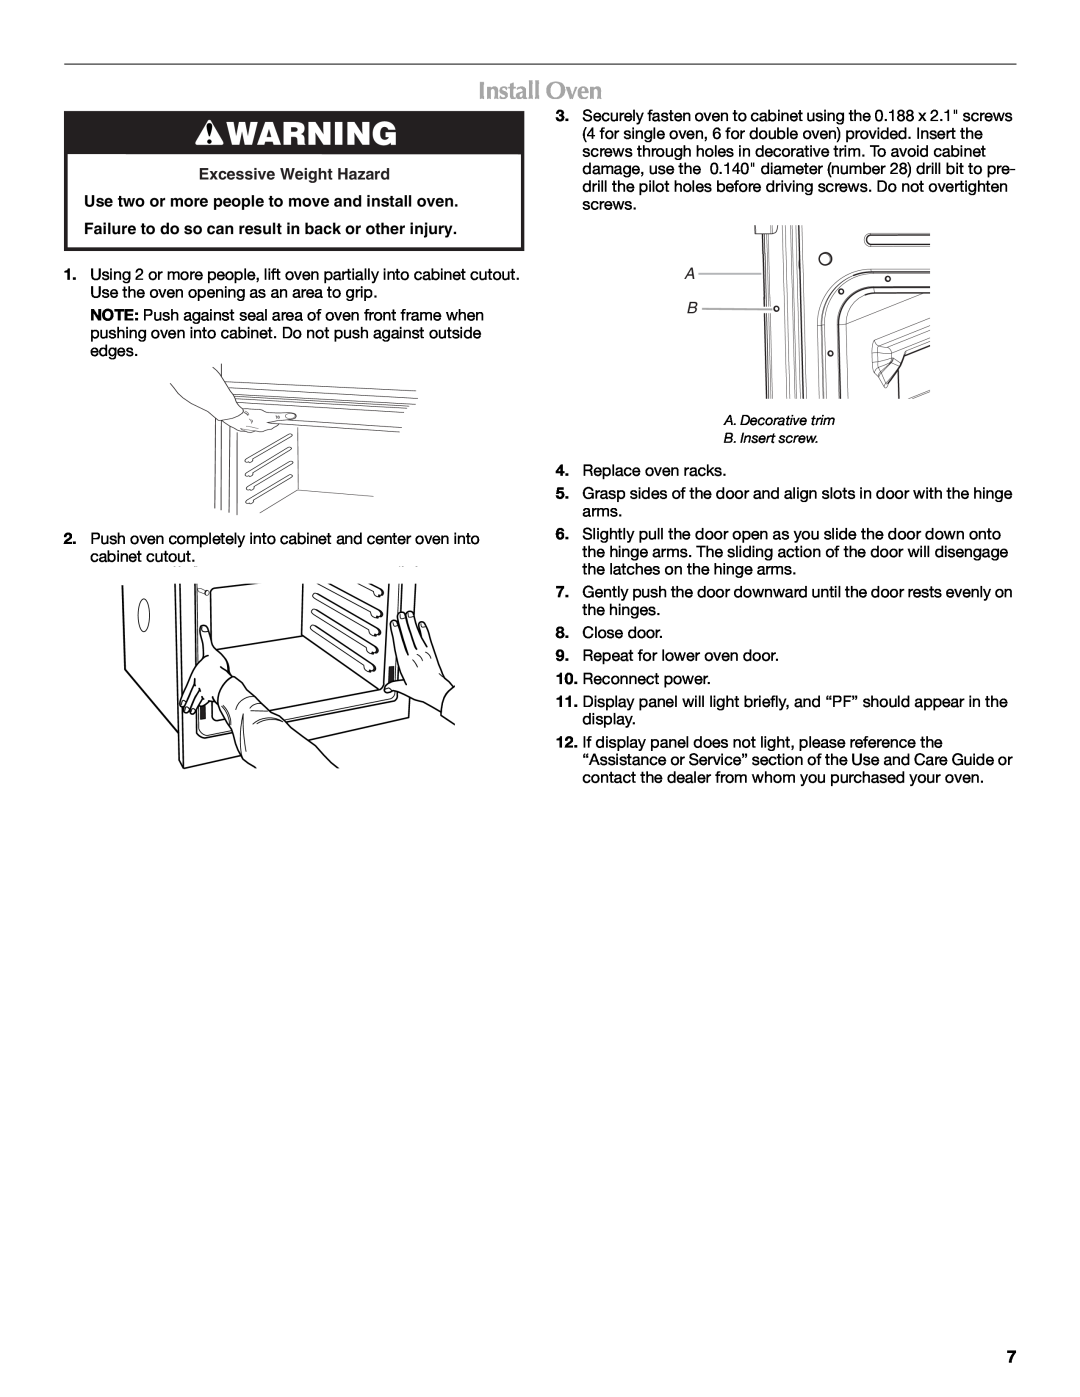 Whirlpool W10203506A installation instructions Install Oven, Excessive Weight Hazard 